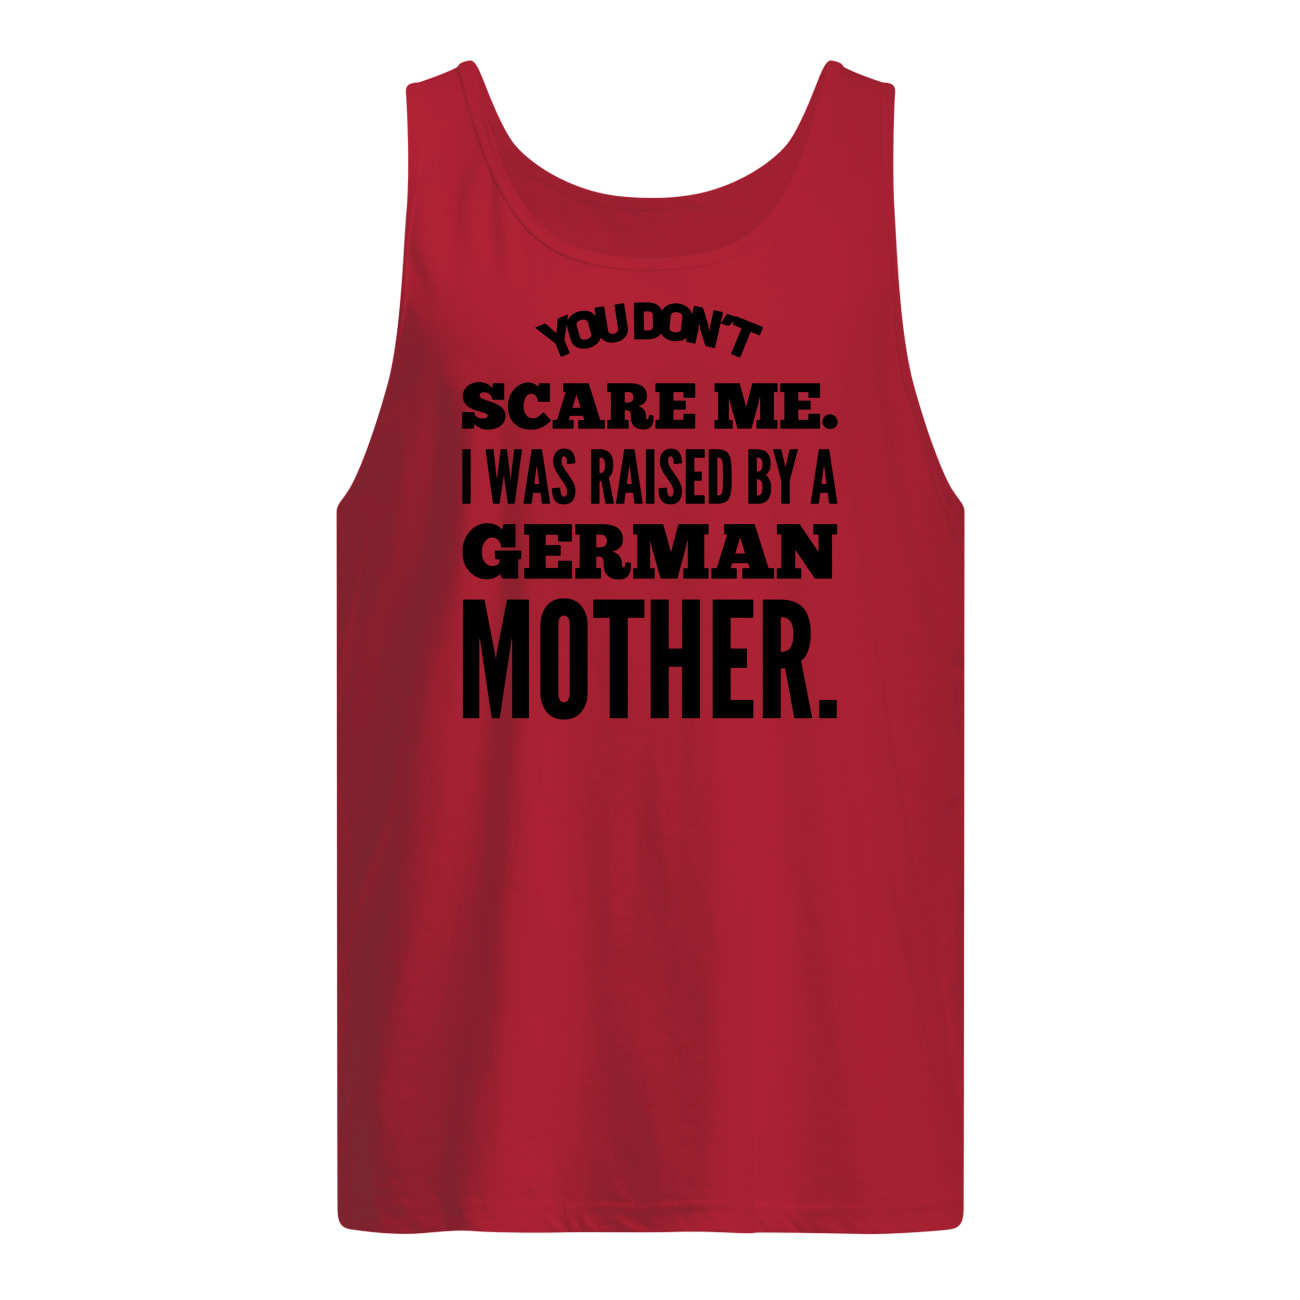 You don't scare me I was raised by a german mother tank top